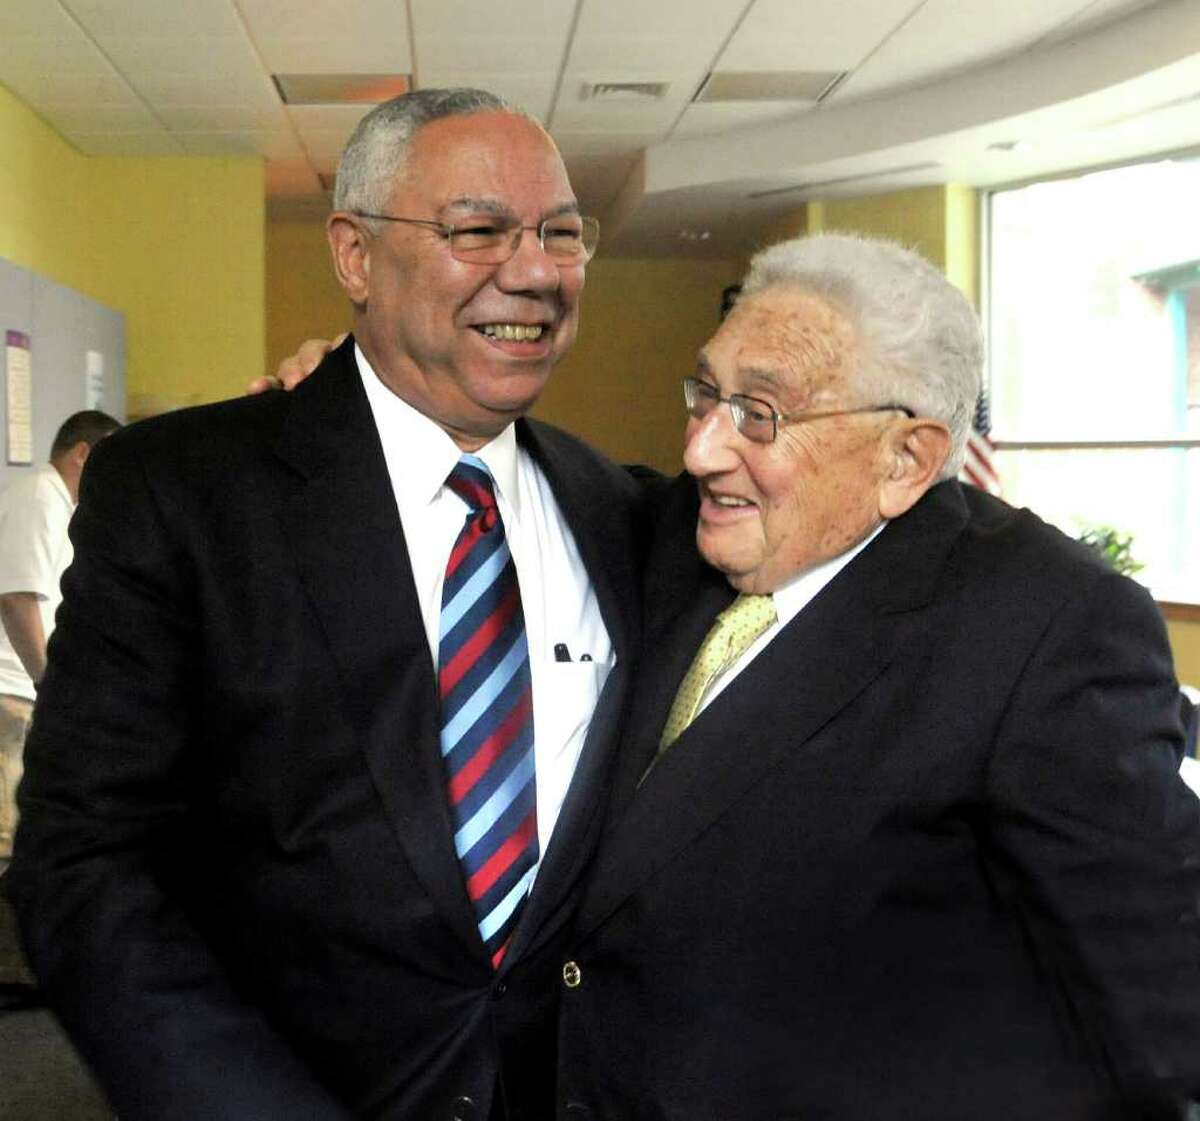 General Colin Powell, left, greets Henry Kissinger upon Powells arrival at the Kent Center School to speak at the Kent Lecture Series at the Library, Sunday, July 3, 2011.